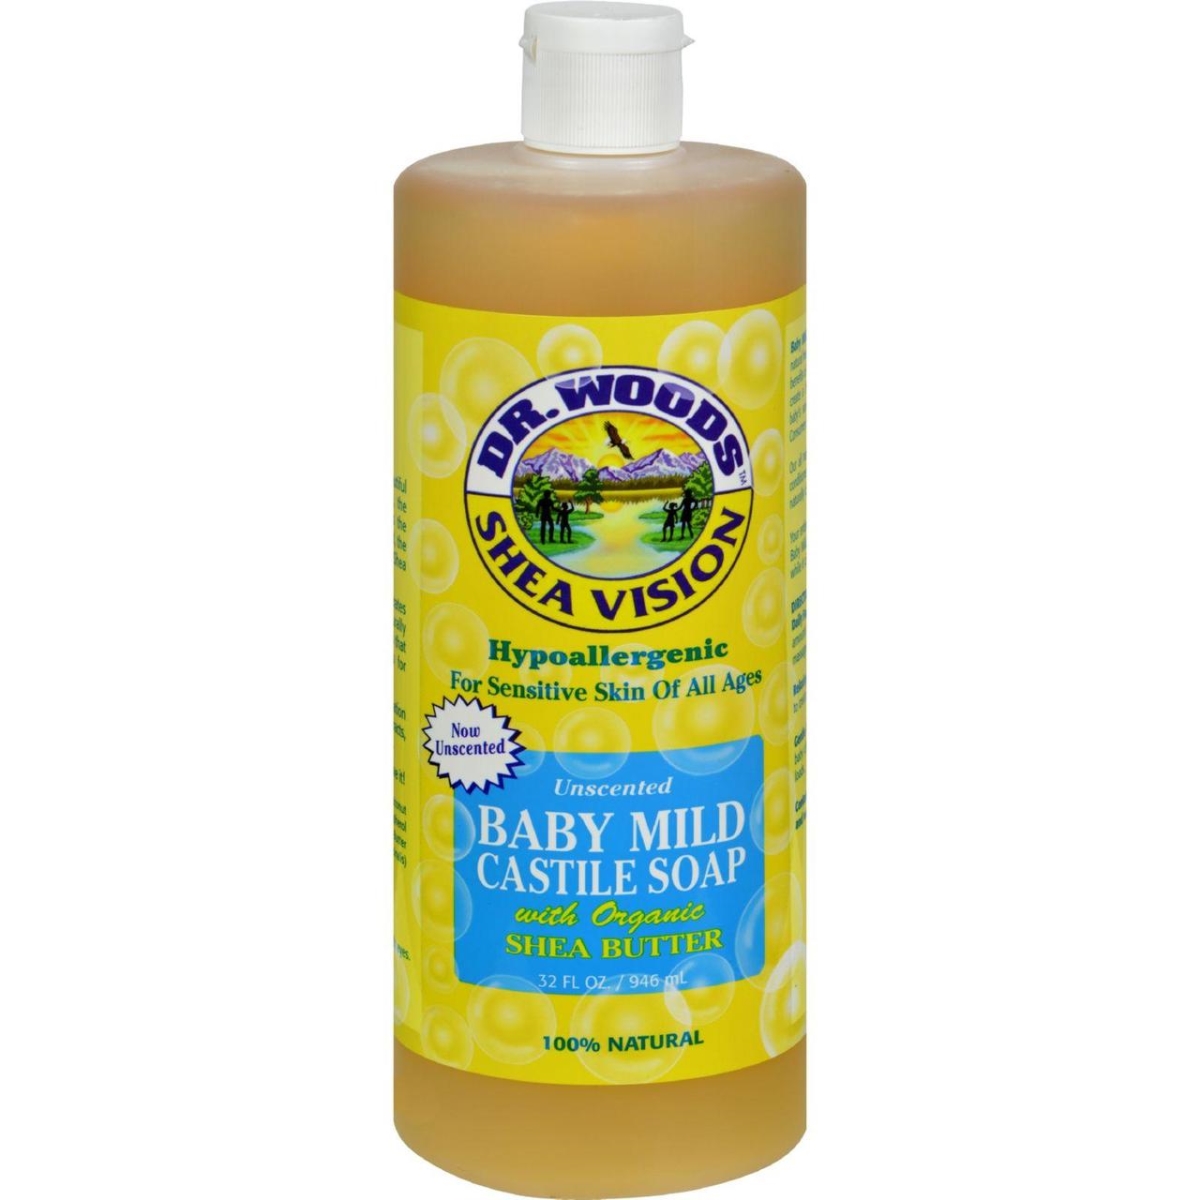 Hg0667840 32 Fl Oz Shea Vision Pure Castile Soap, Baby Mild With Organic Shea Butter